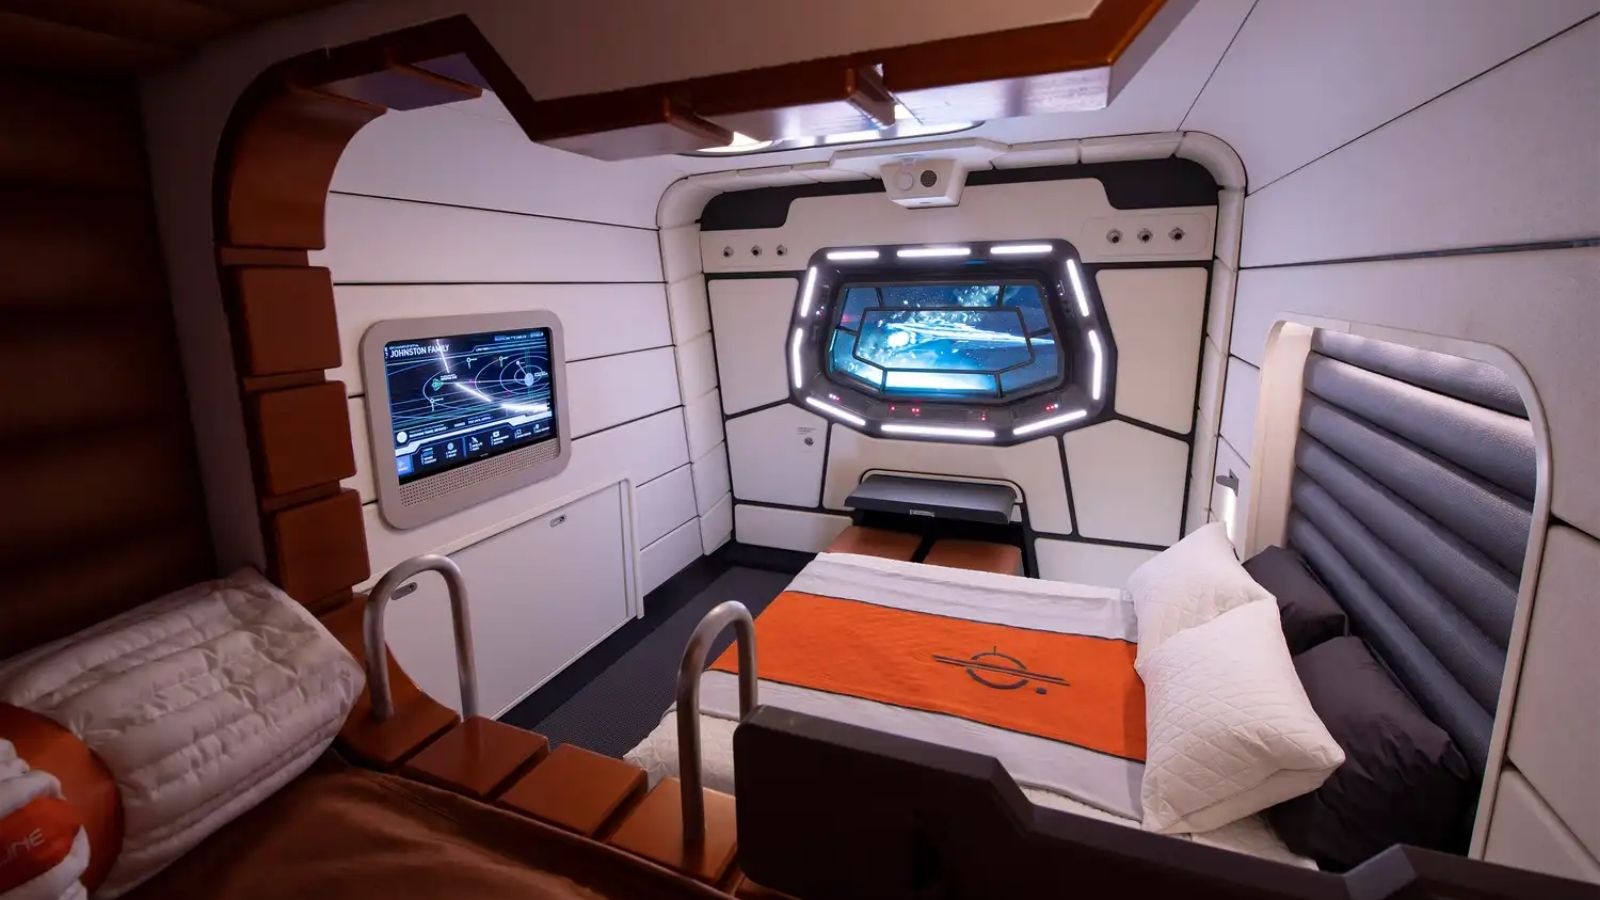 This mock-up of a starship cabin shows the accommodations guests will experience at the Star Wars hotel (Photo: David Roark)